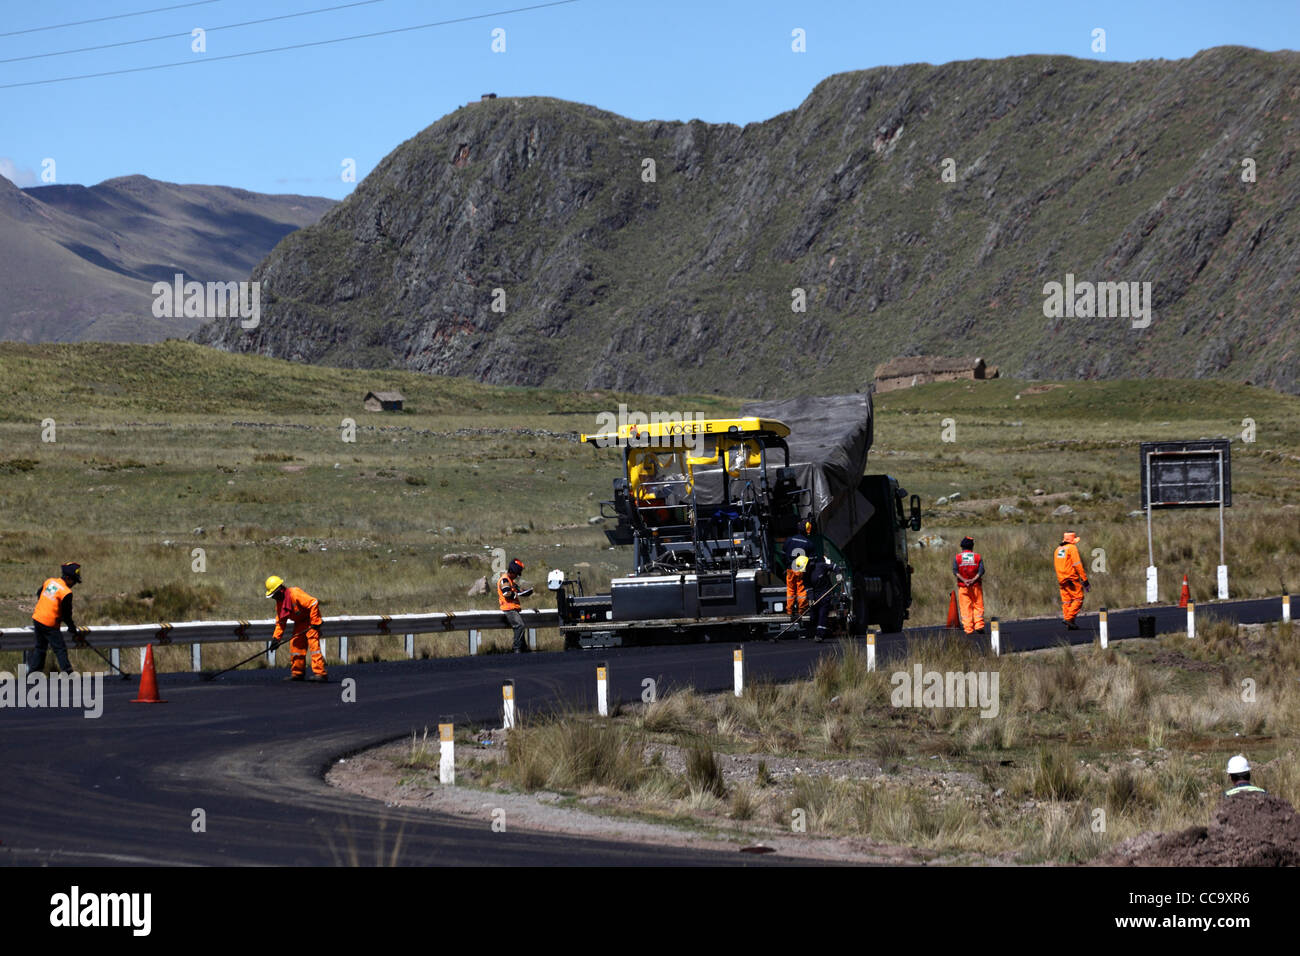 Road resurfacing and construction work in progress on main road between Cusco and Puno, Peru Stock Photo